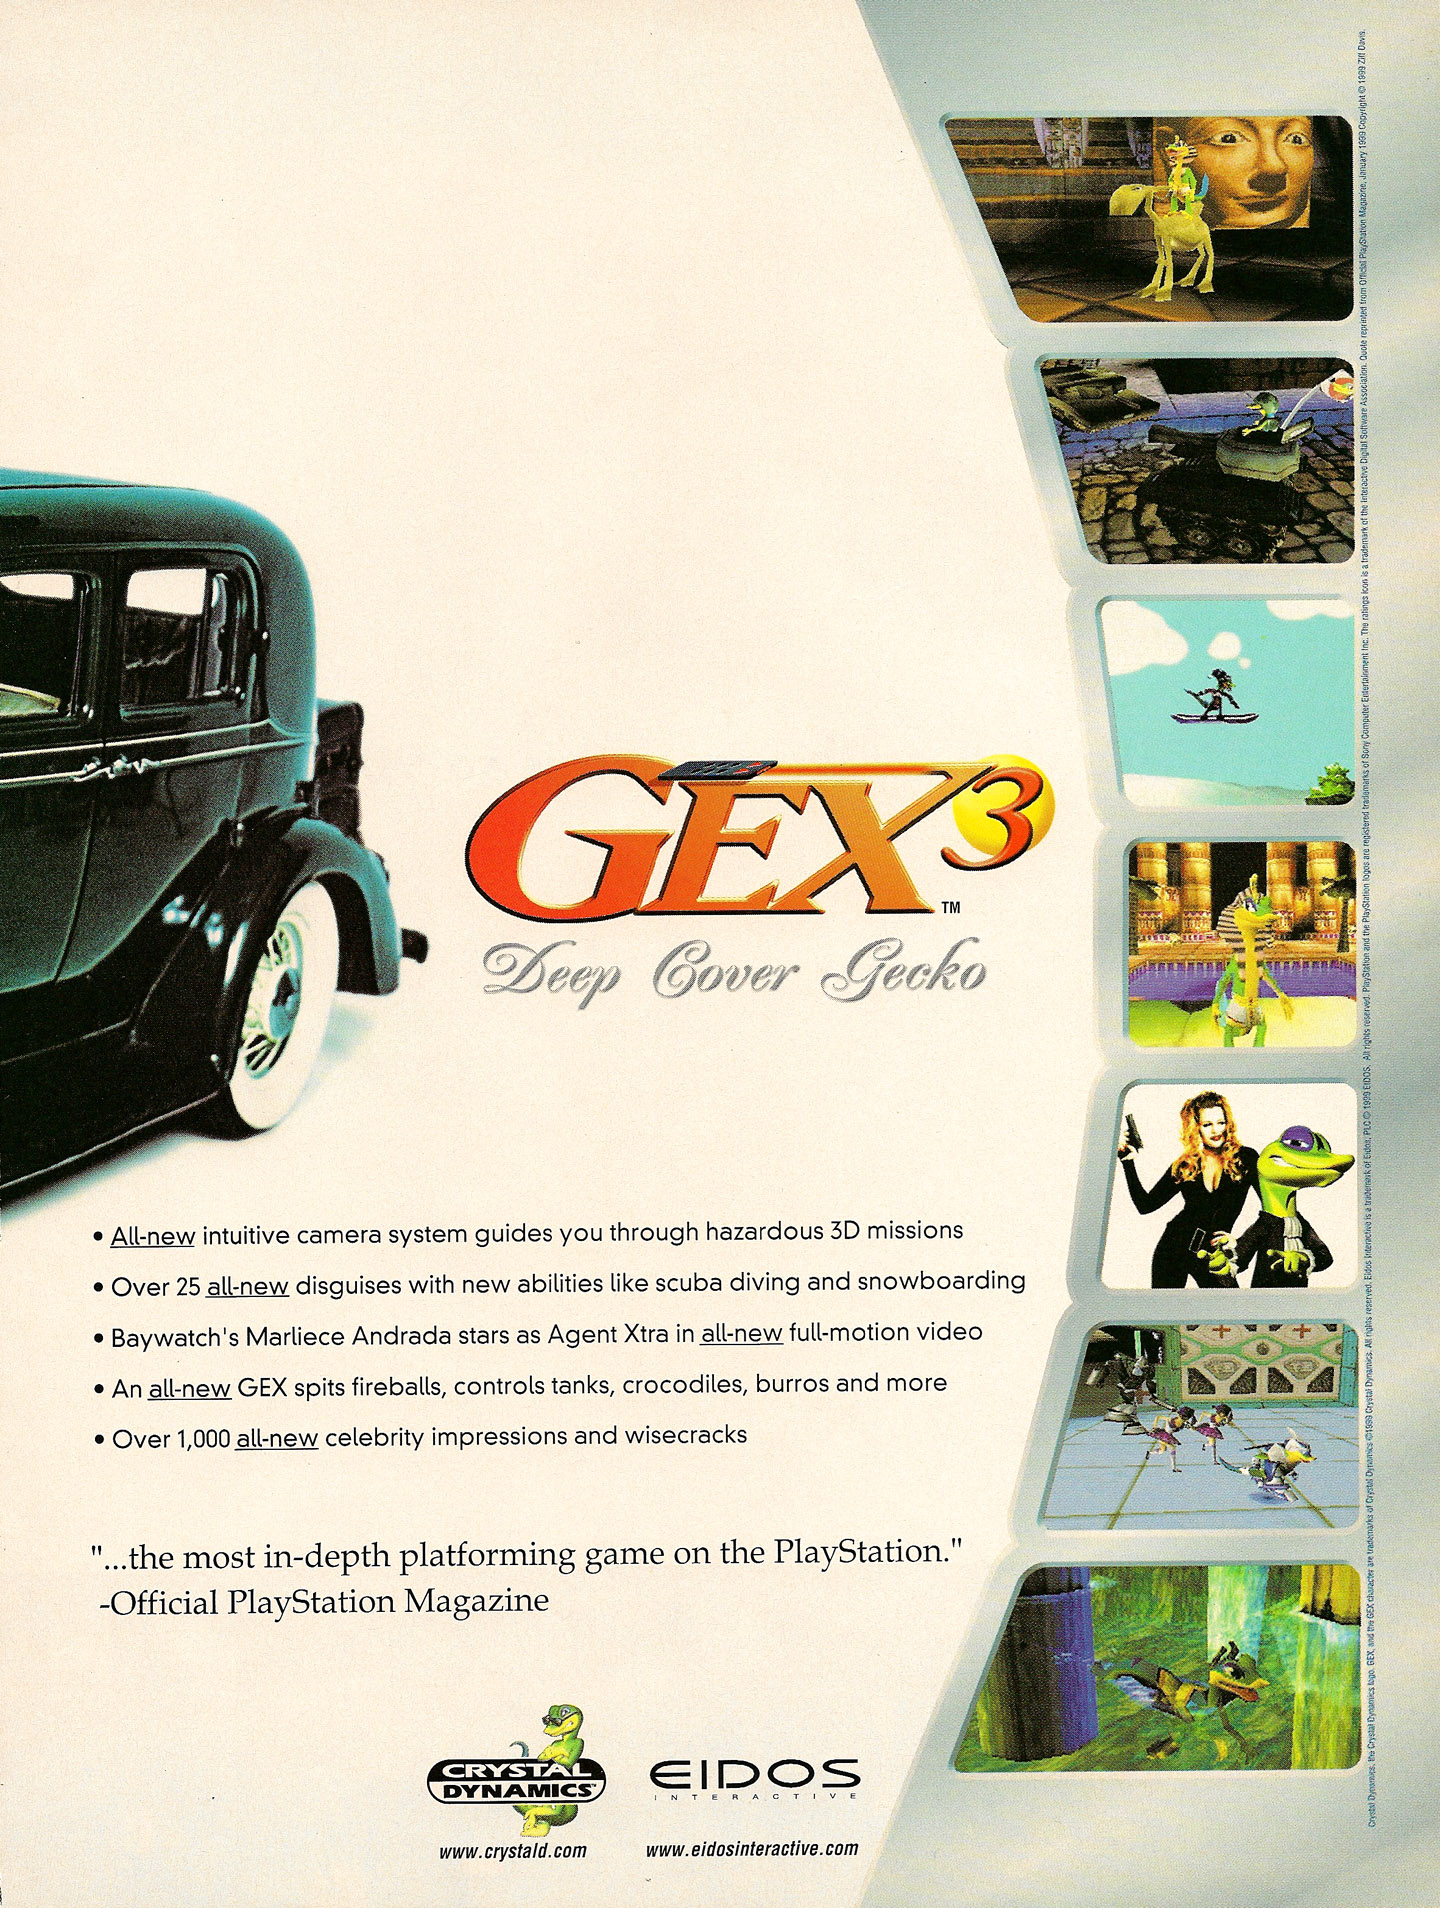 download gex deep cover gecko n64